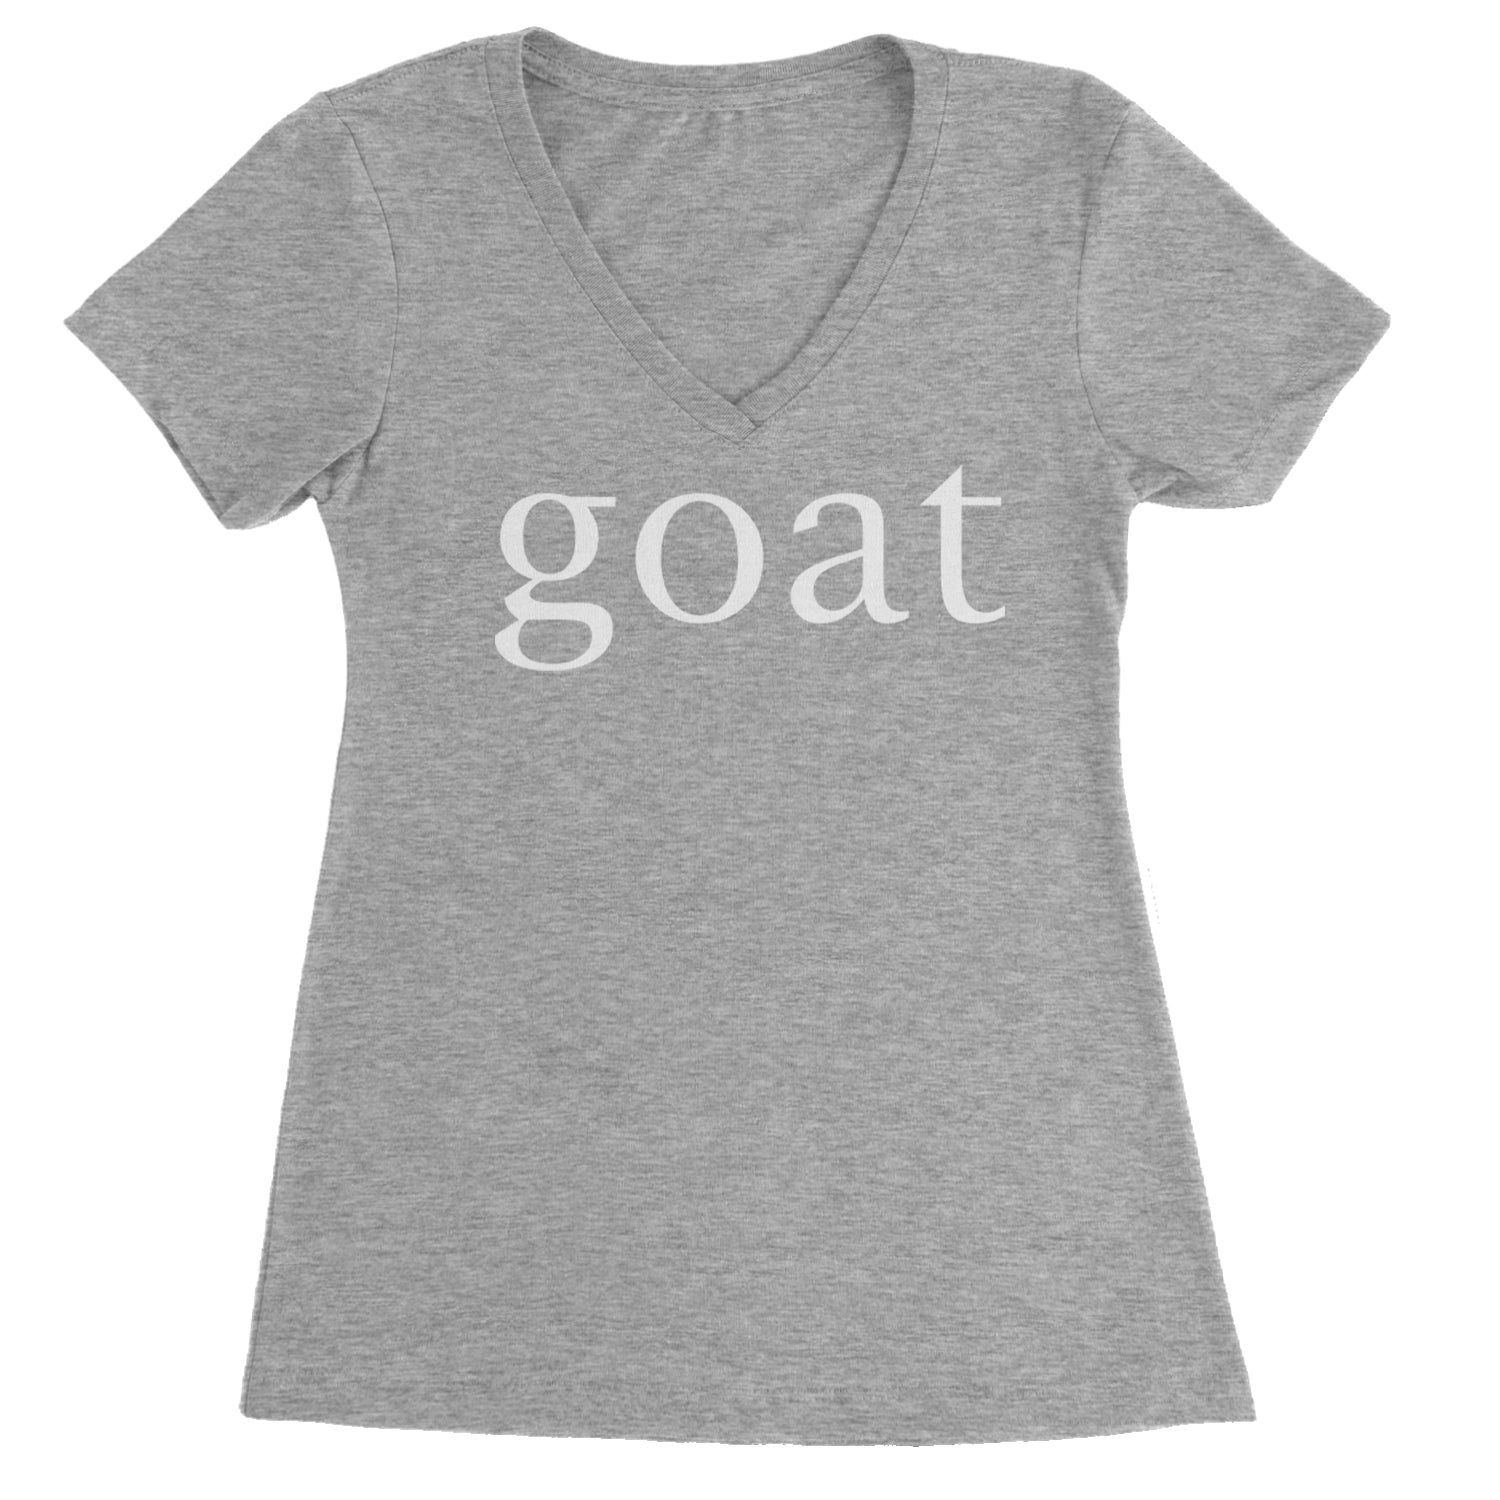 GOAT - Greatest Of All Time  Ladies V-Neck T-shirt Heather Grey